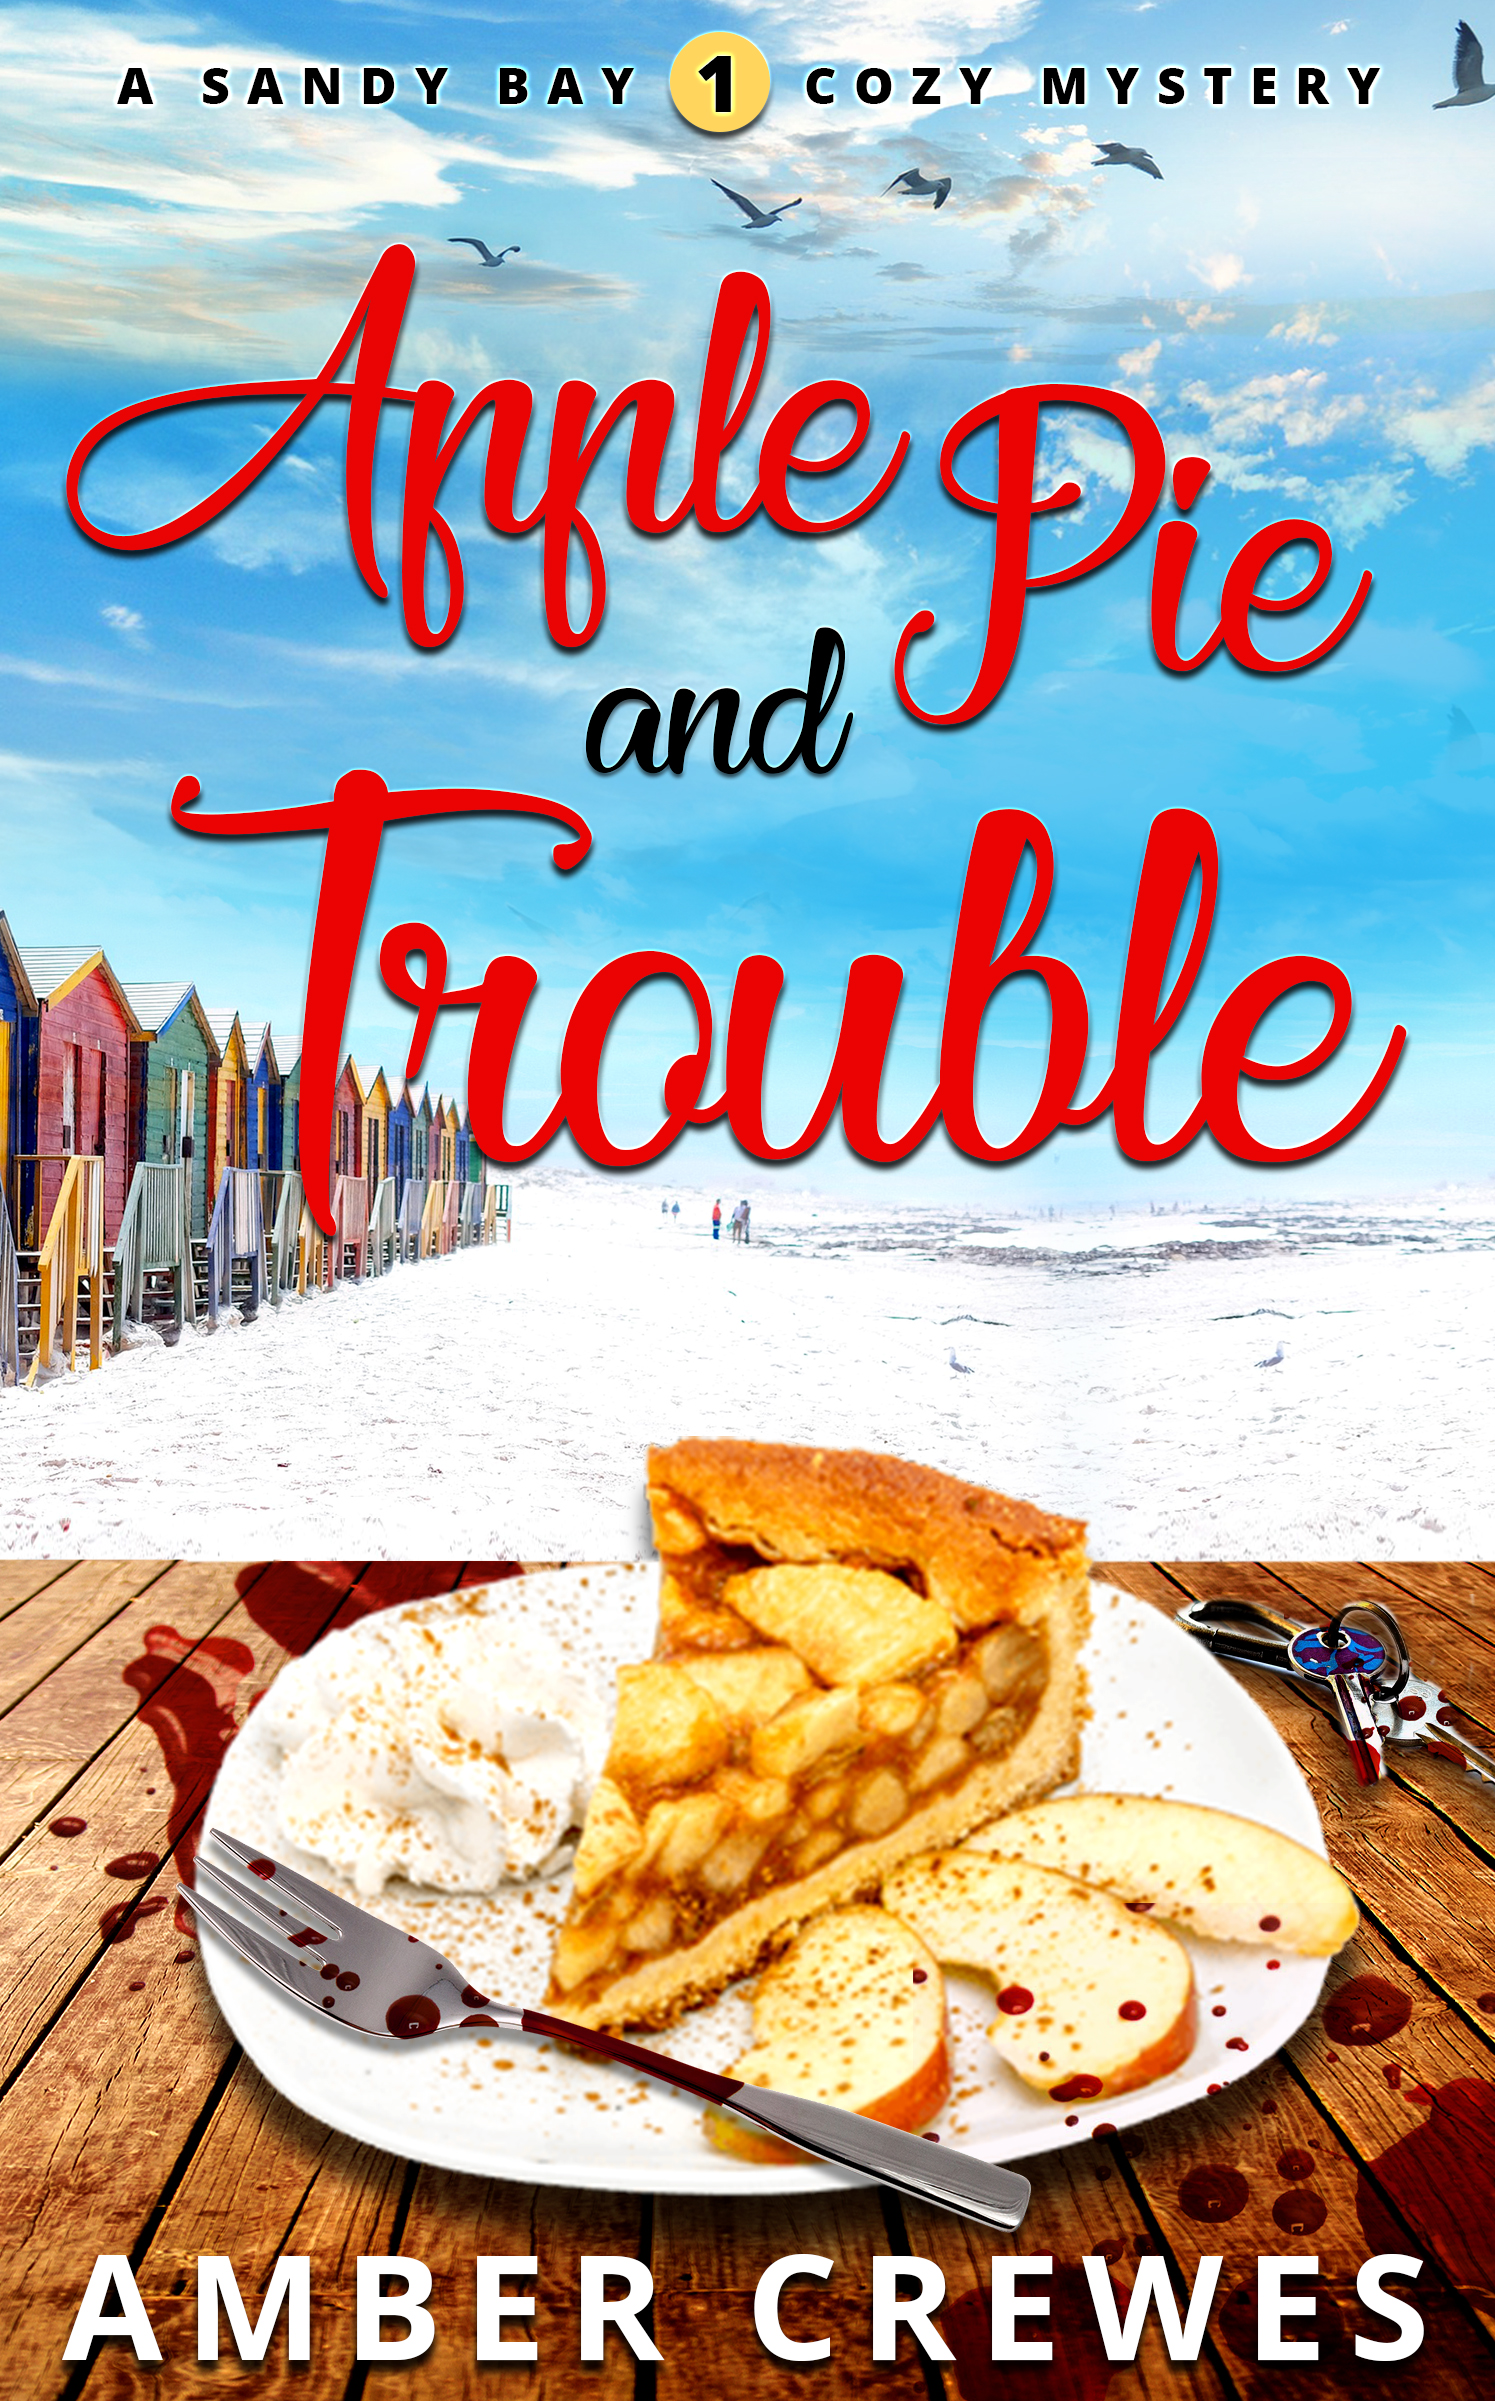 Apple Pie and Trouble